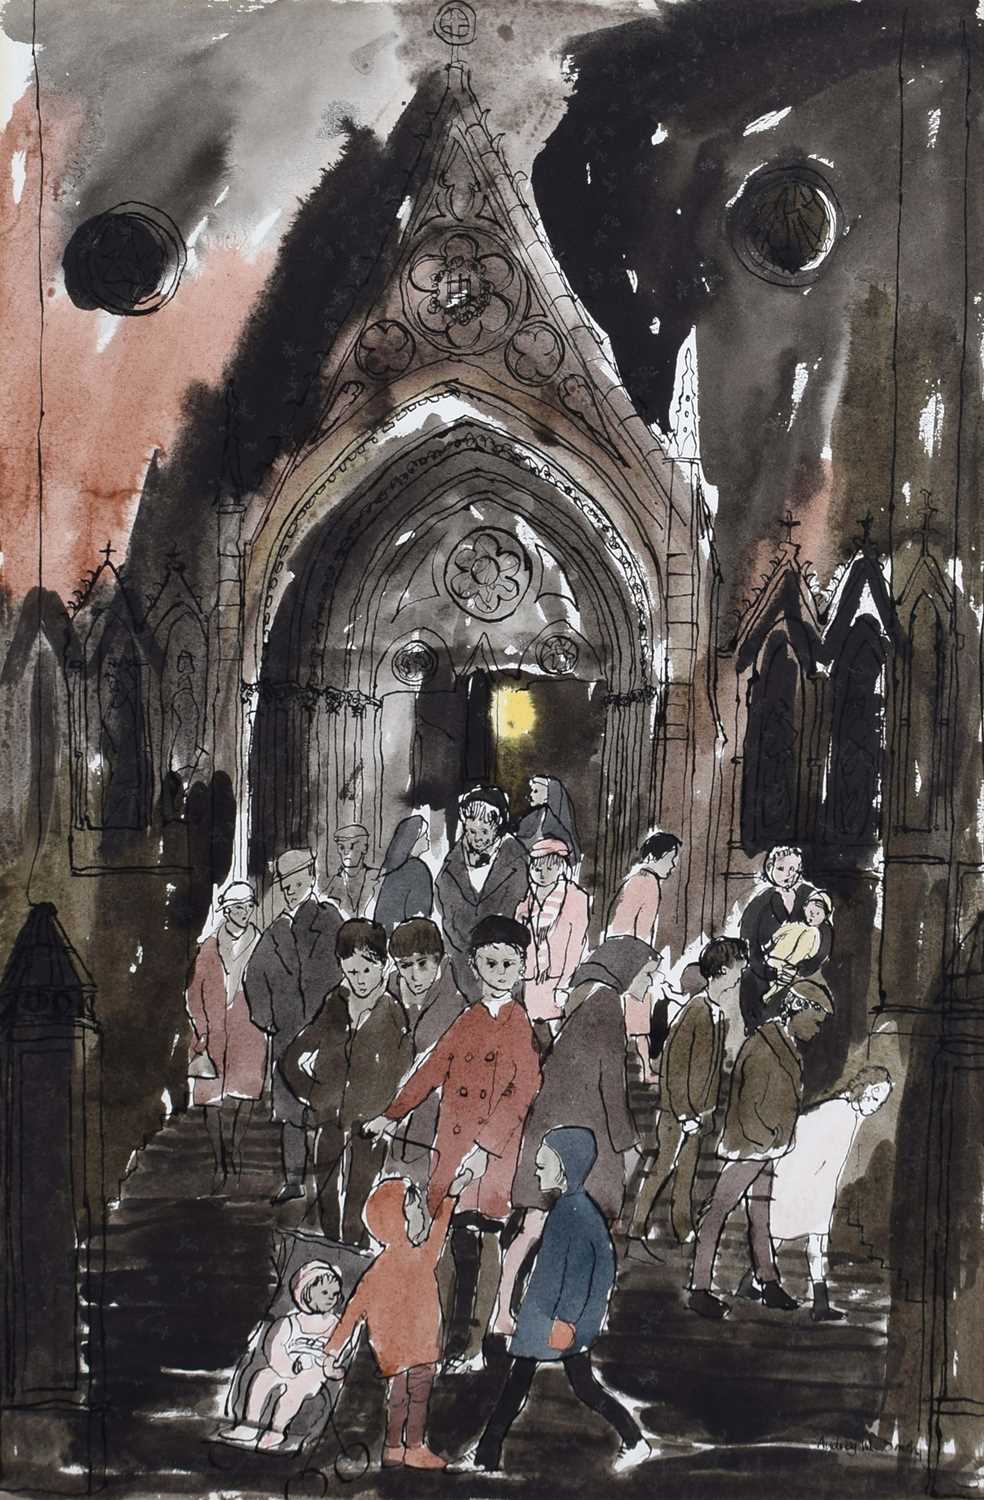 Audrey M. Smith (1933-) "The Church of the Holy Name, Manchester"